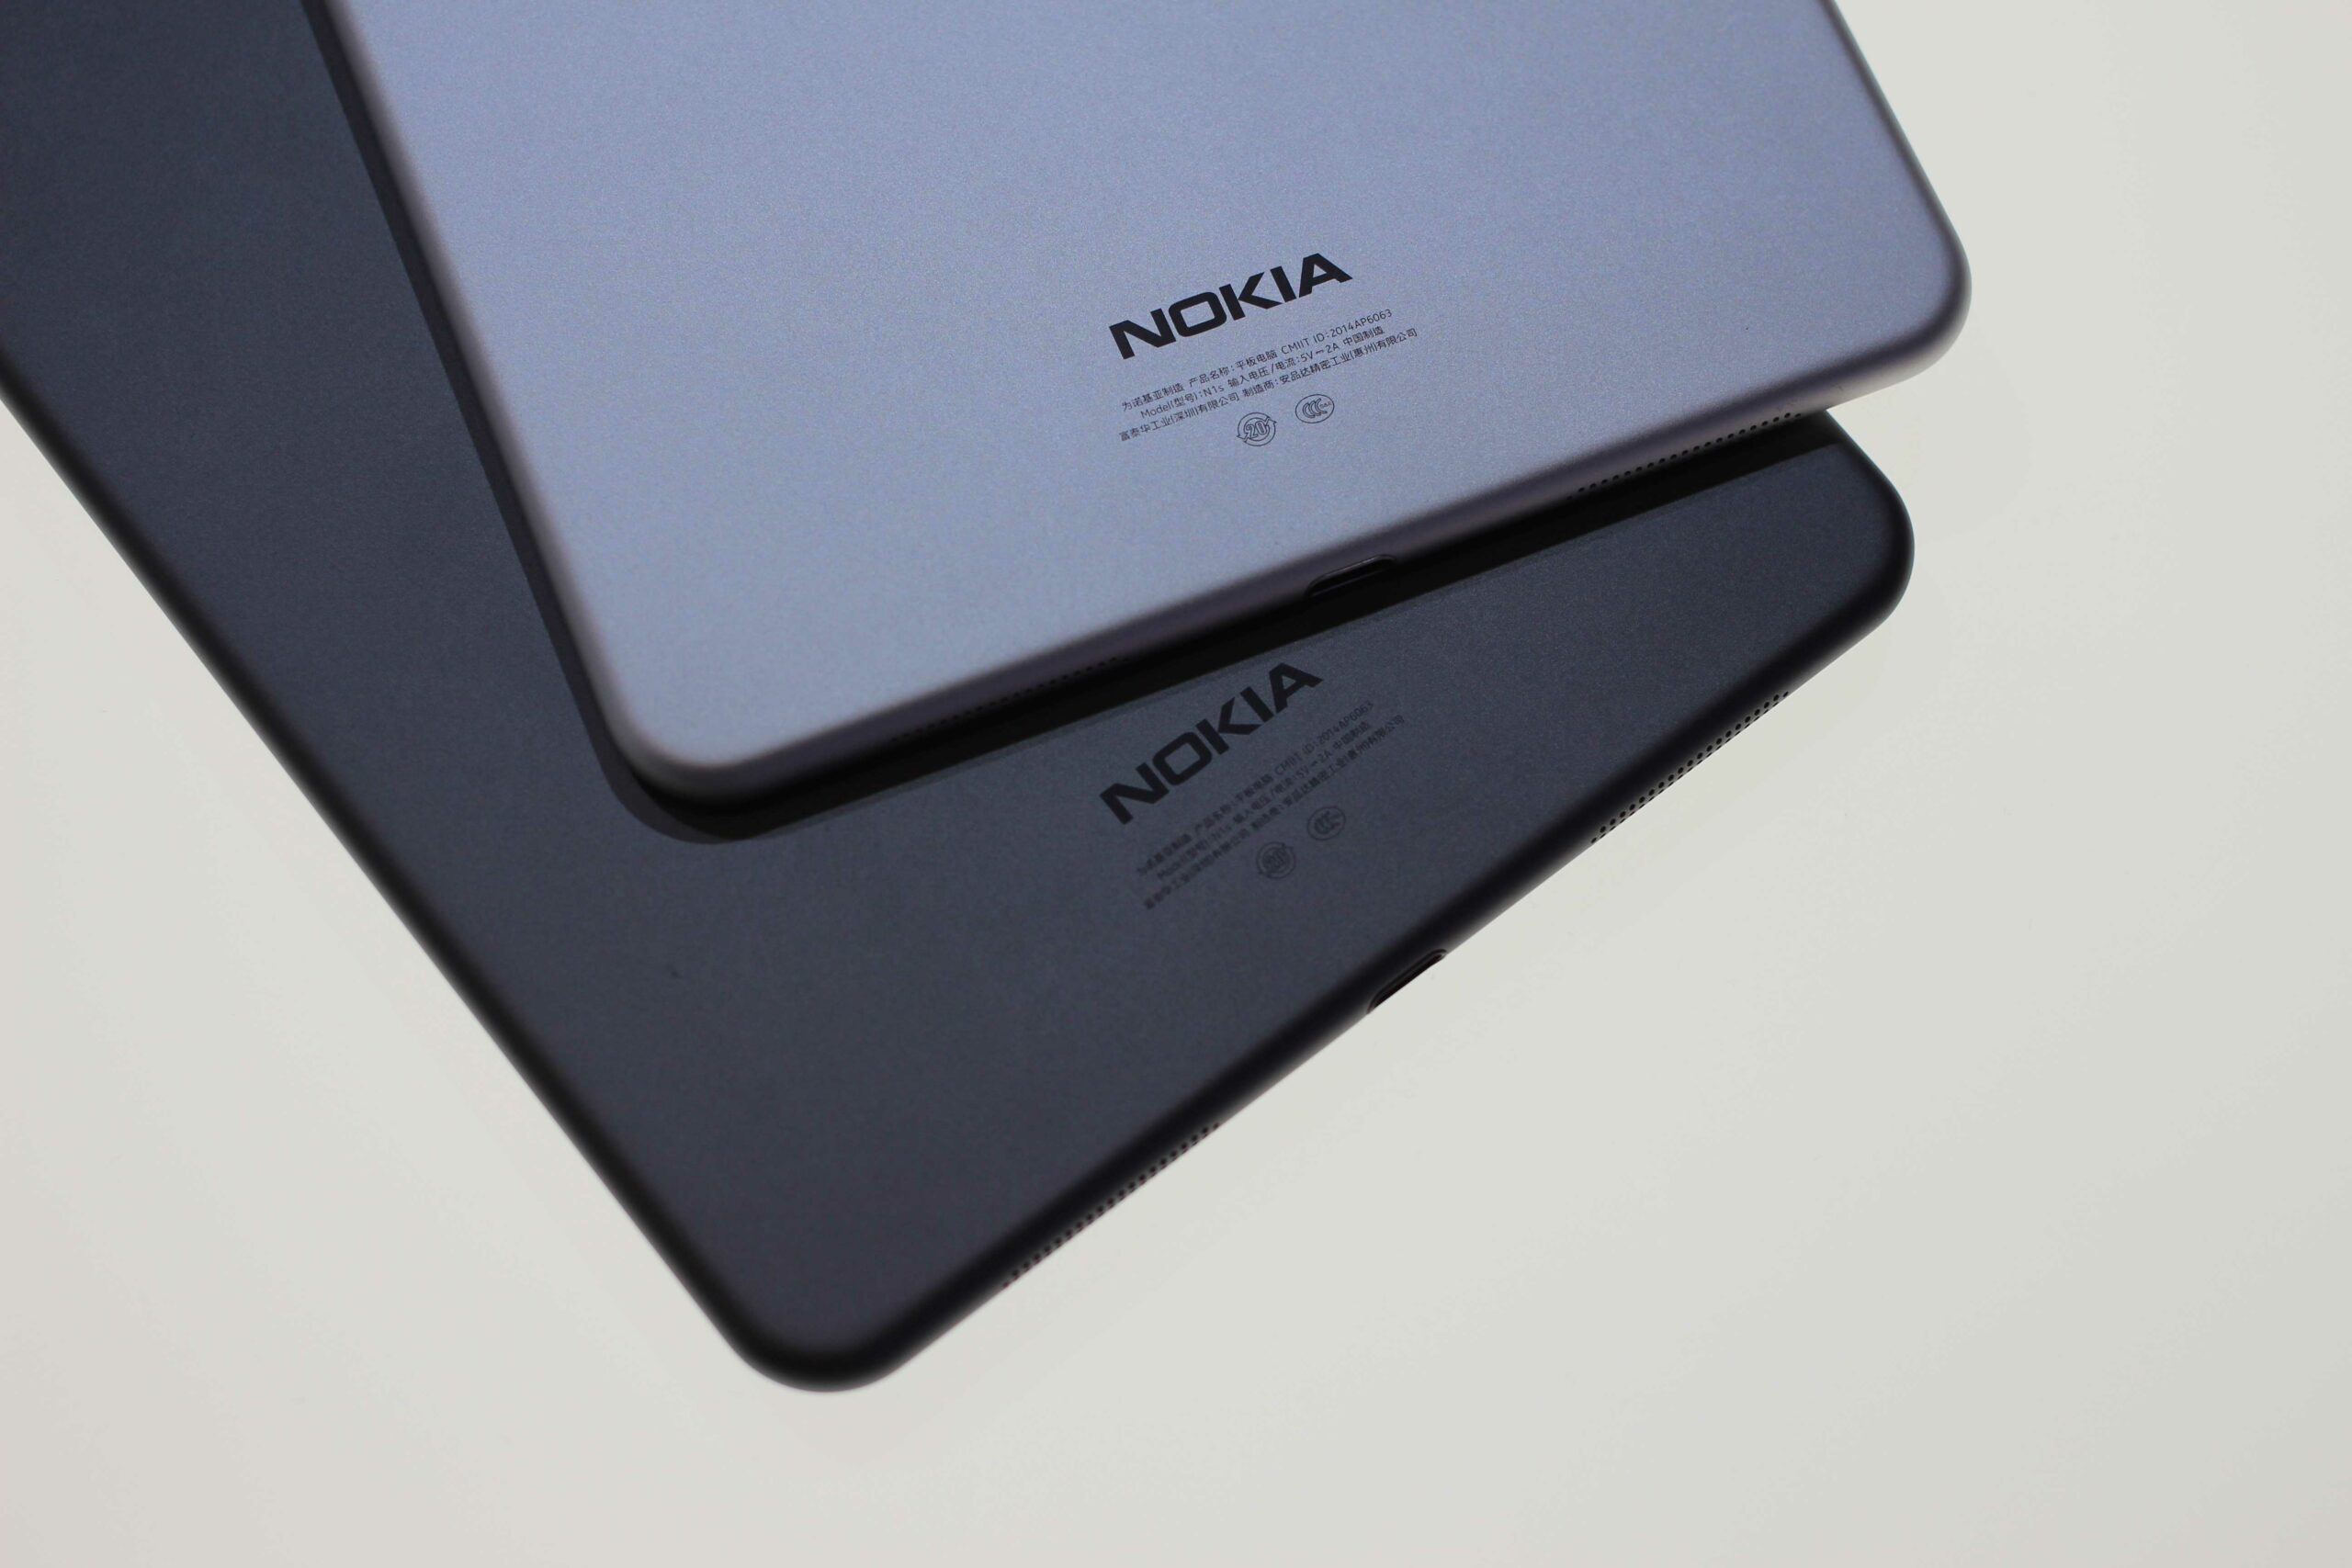 A new Nokia tablet with 18.4-inch QHD display, Snapdragon 835 SoC spotted